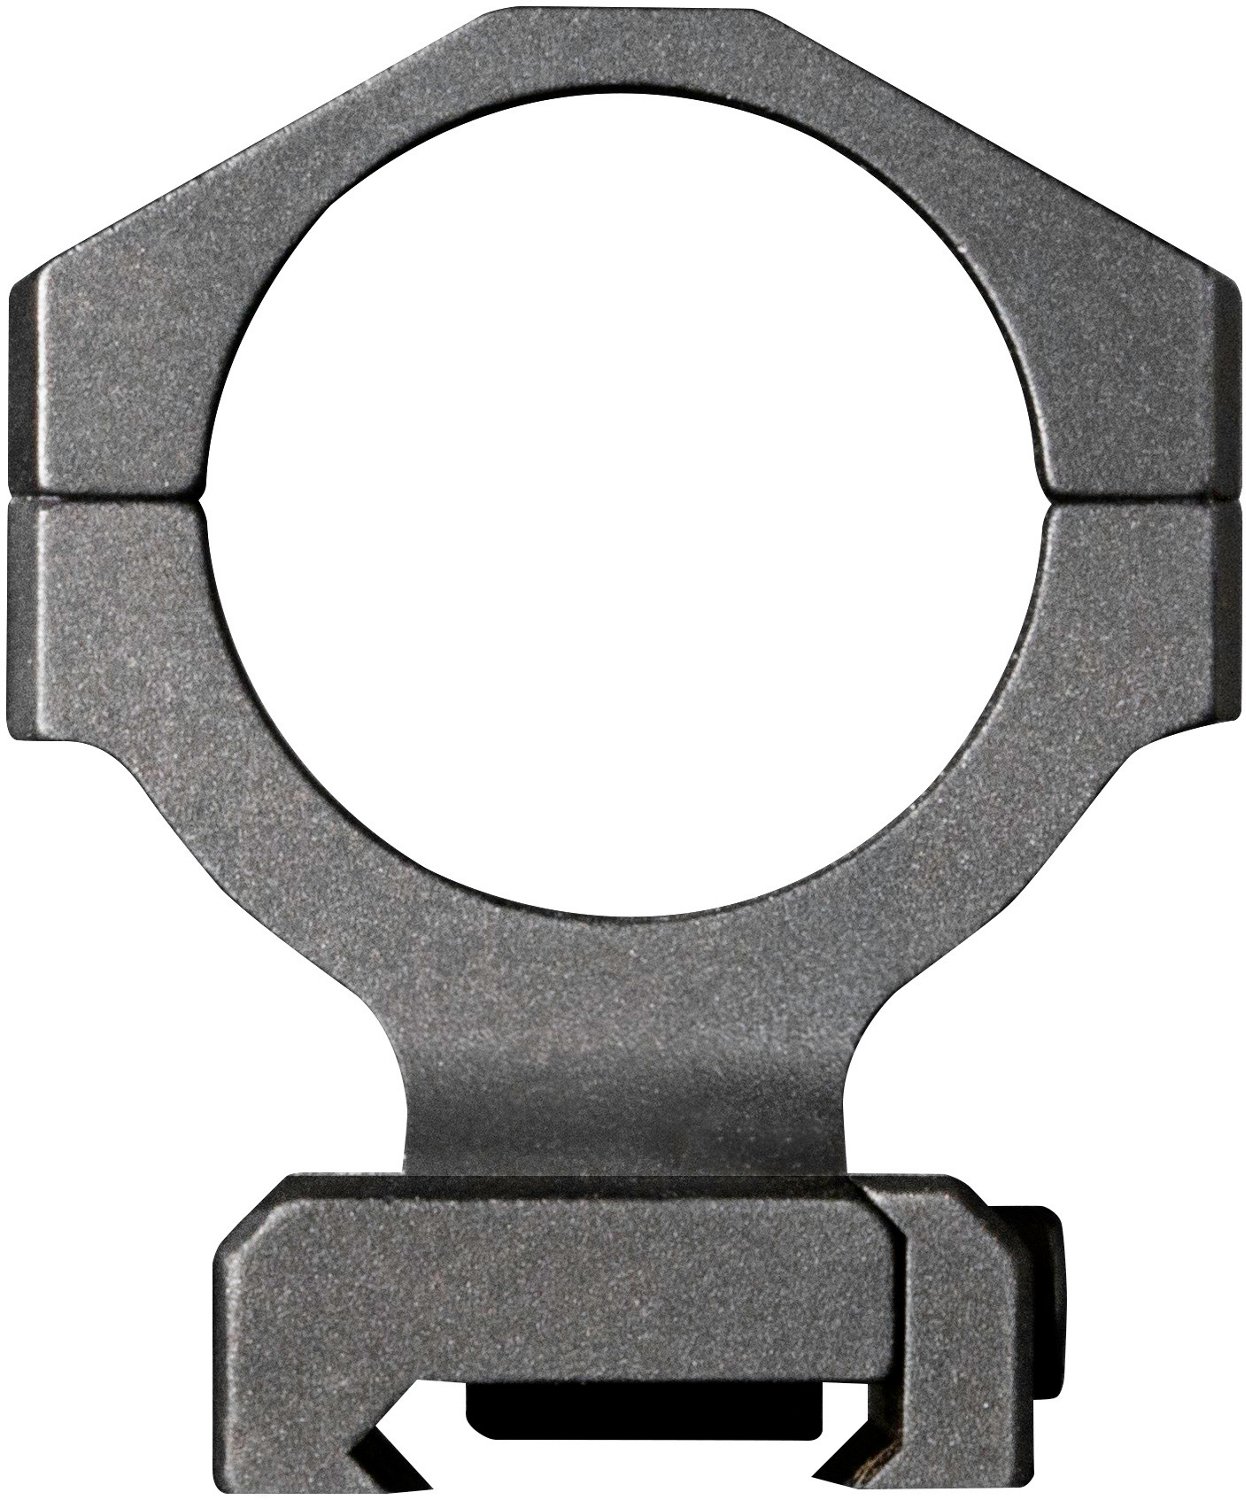 Leupold Mark AR Integral Mounting System 1-Piece Base and Ring Combo                                                             - view number 3